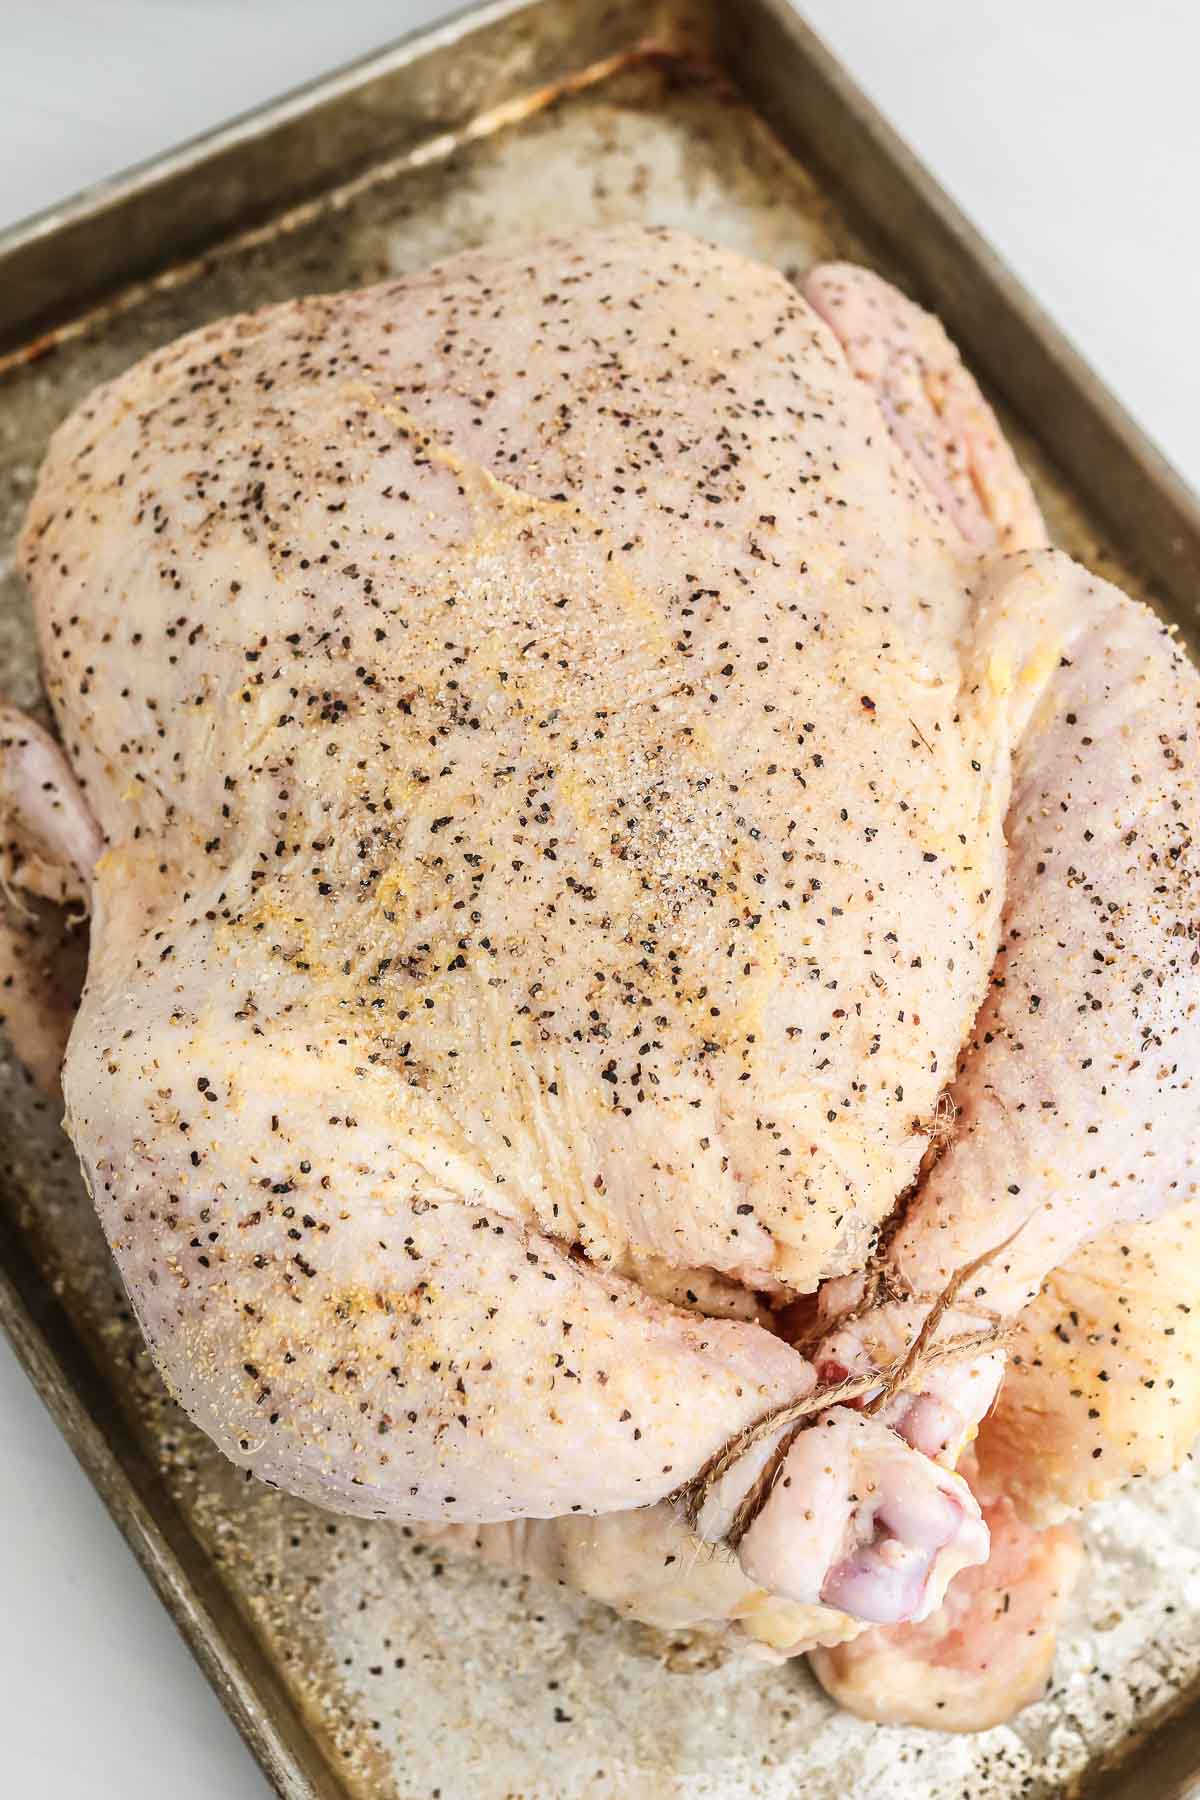 Raw and seasoned whole chicken placed on a tray